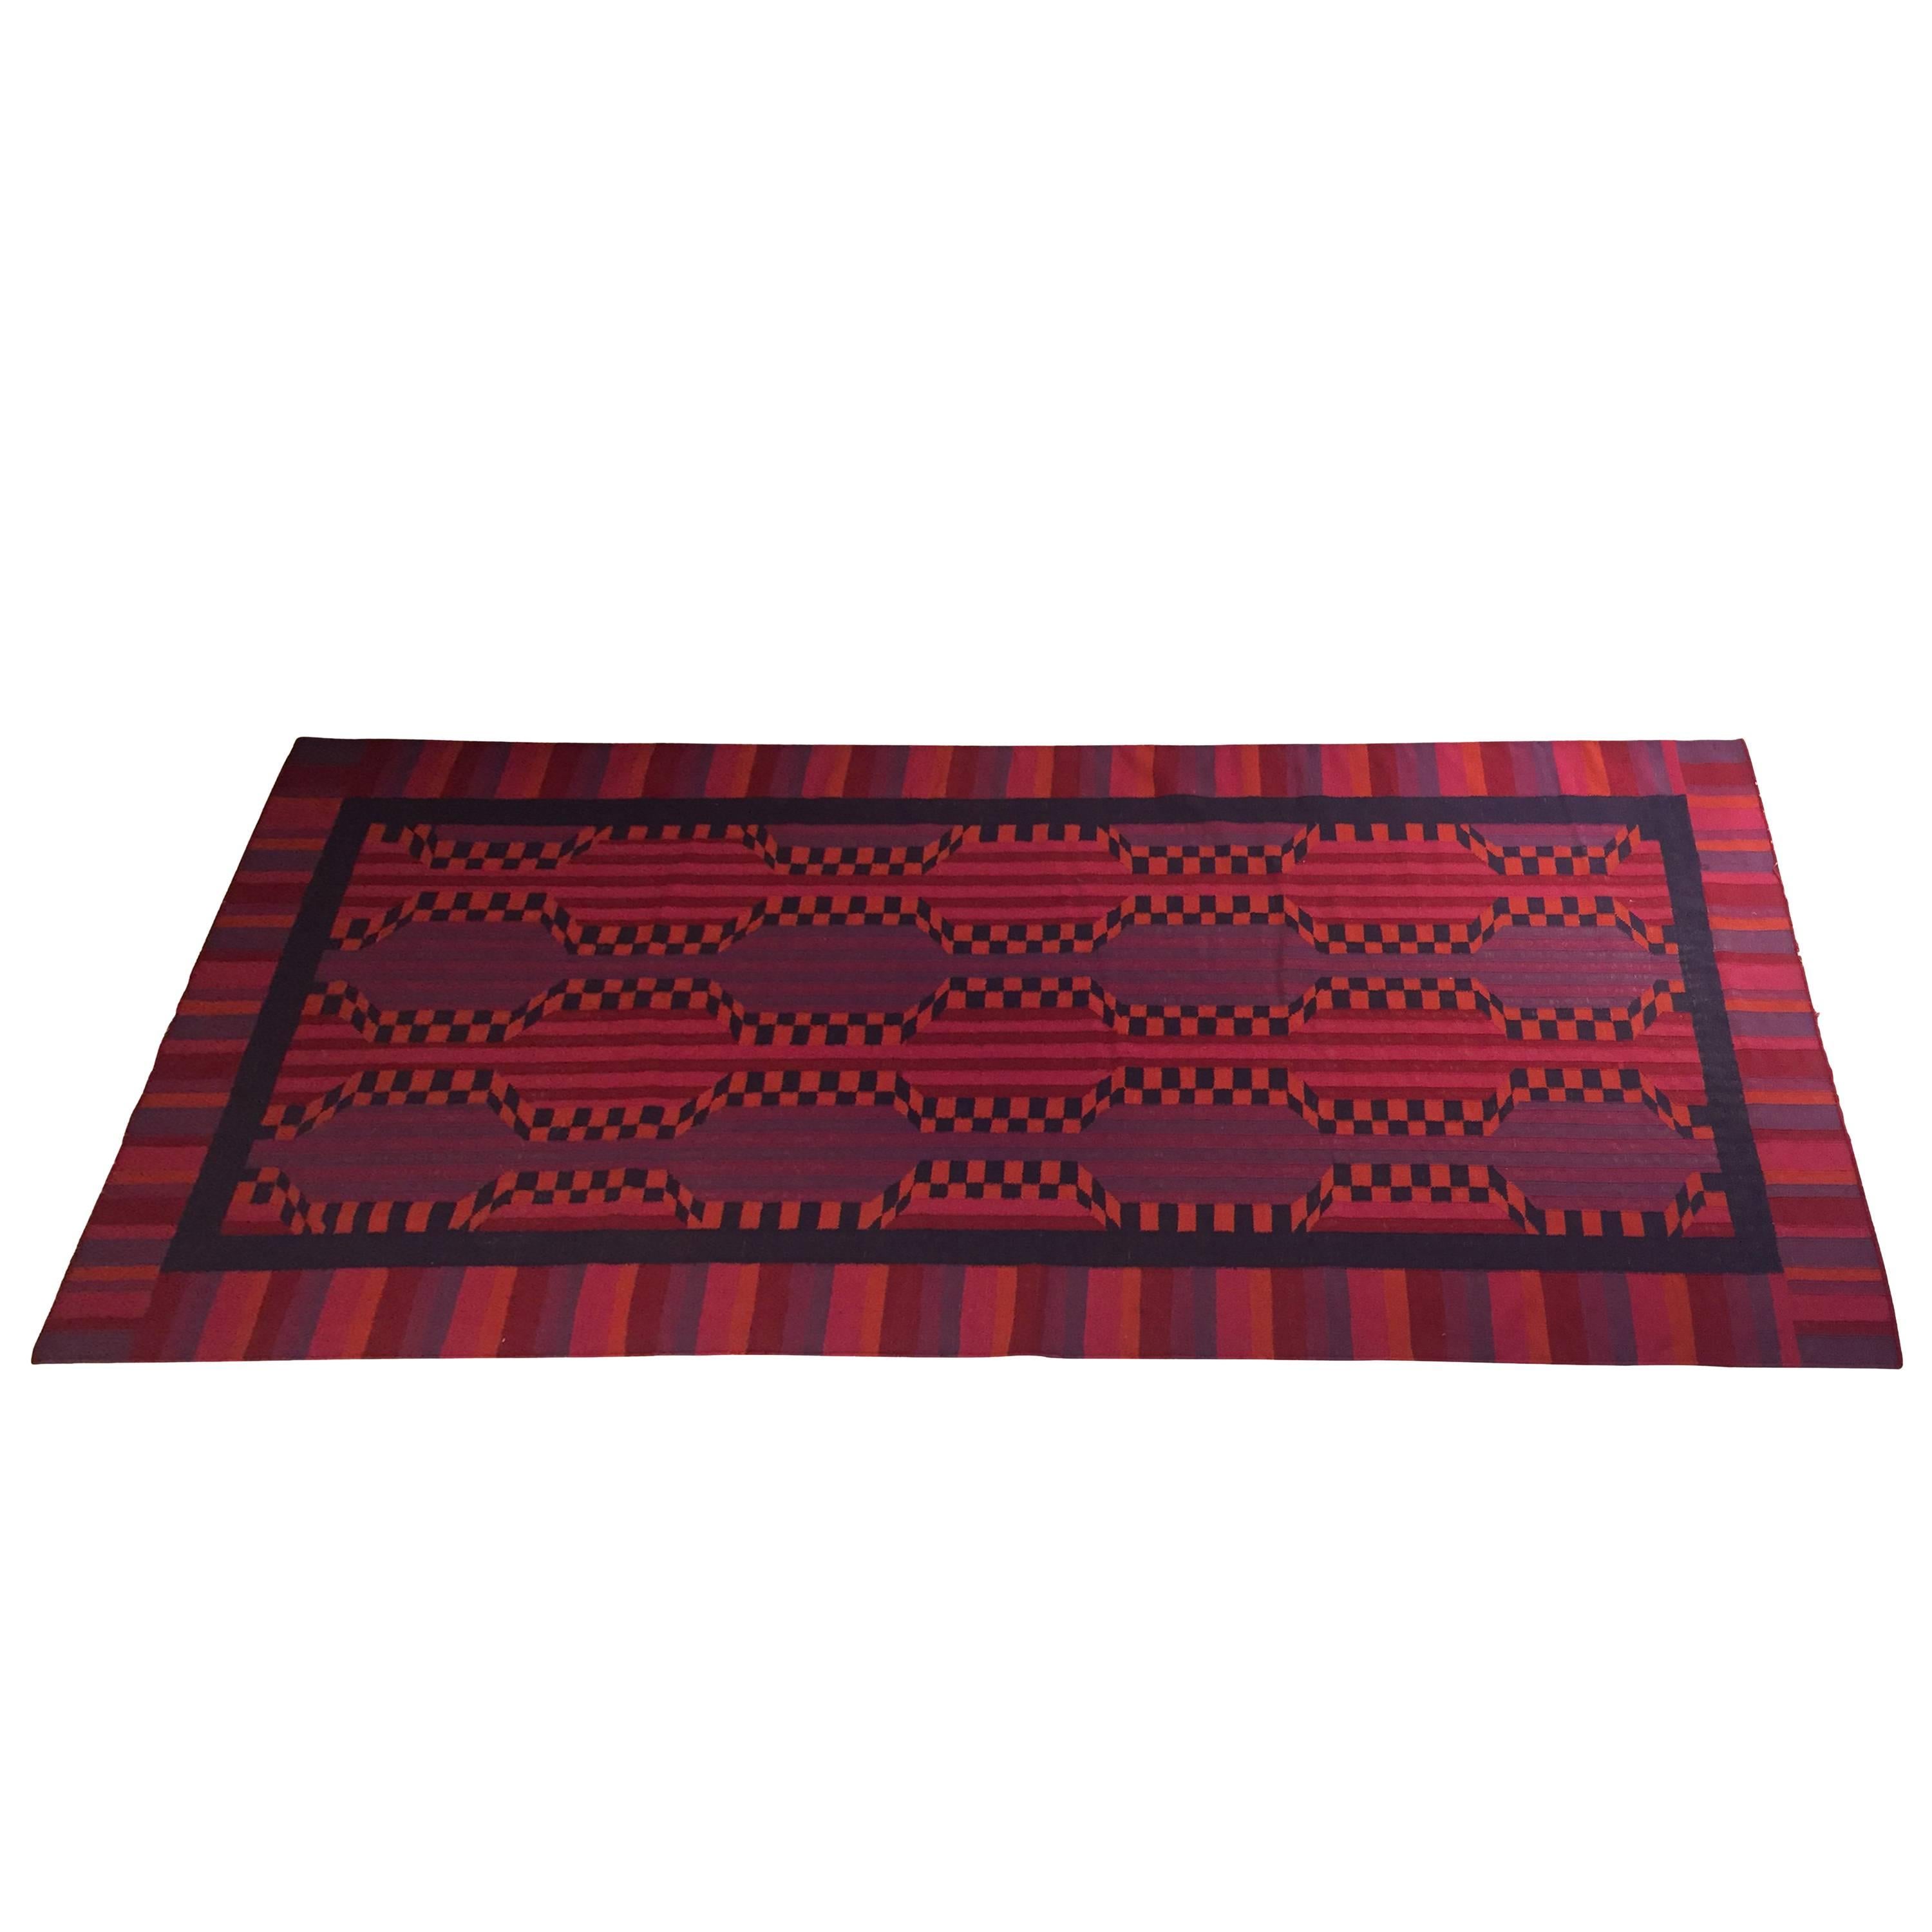 American Handwoven Wool Area Rug For Sale